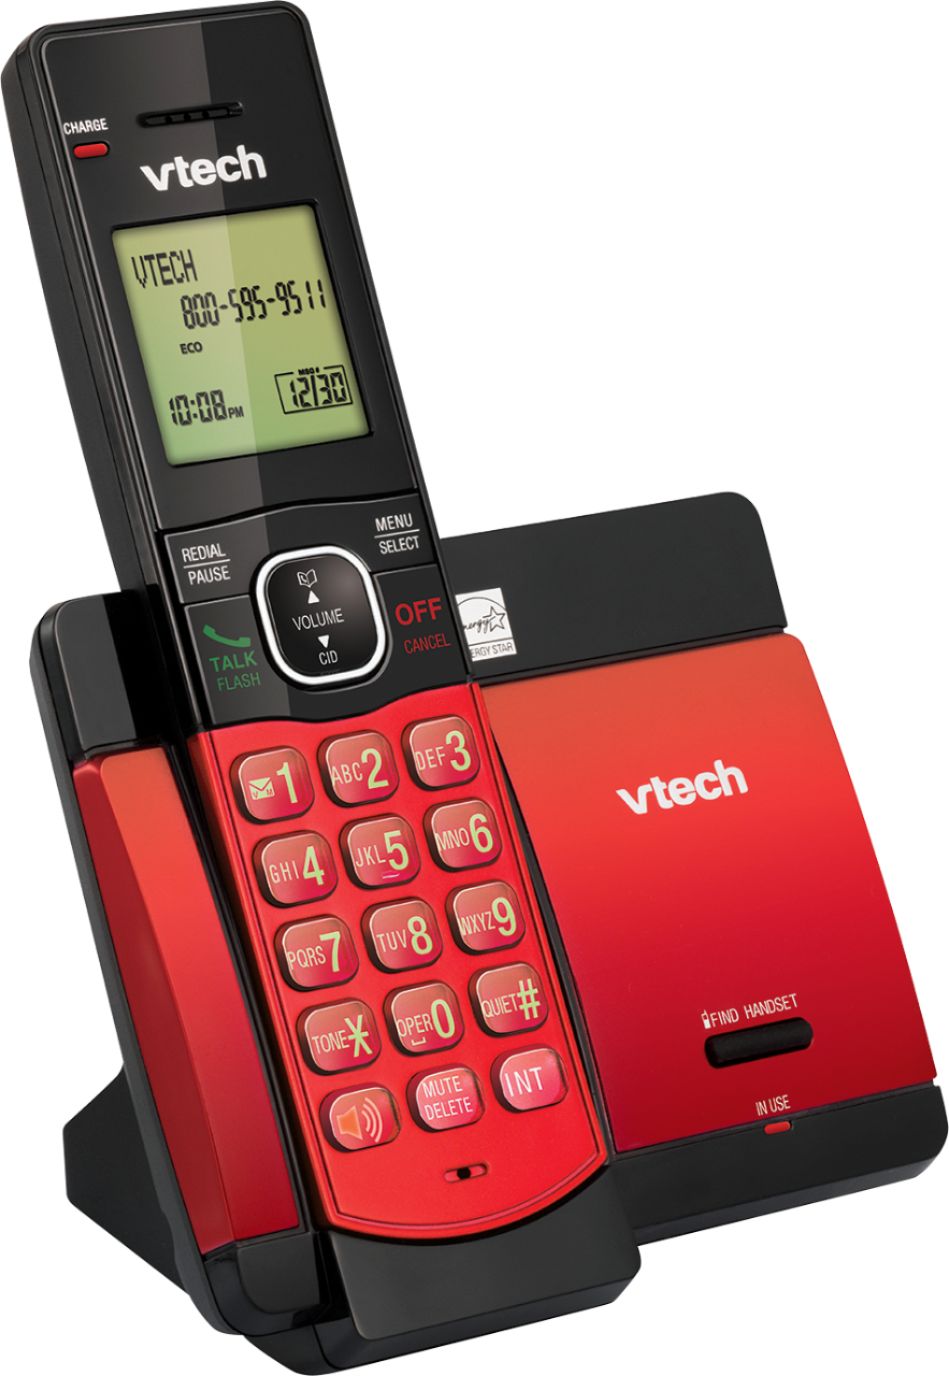 Angle View: VTech - CS5119-16 DECT 6.0 Expandable Cordless Phone System - Red